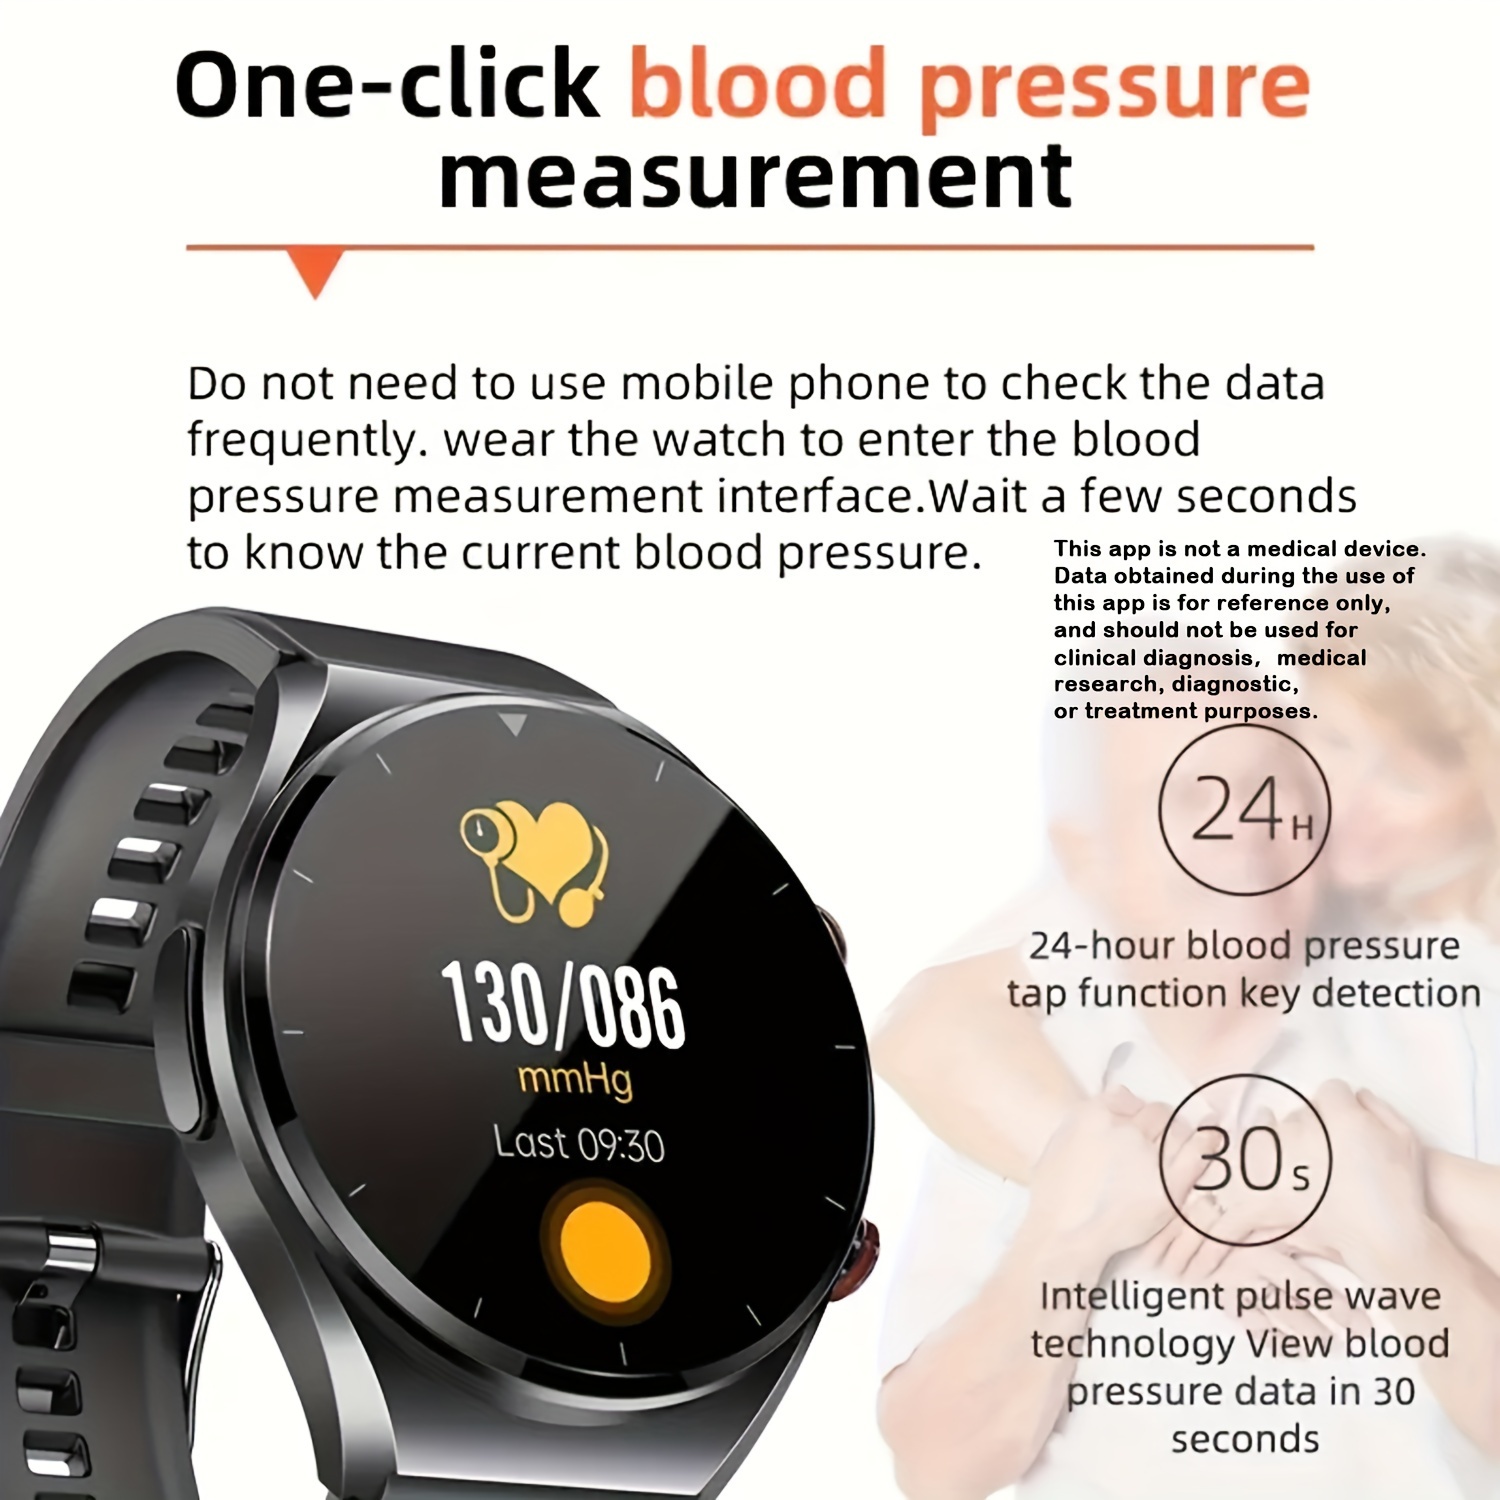 Discover the smartwatch that can help track your blood pressure